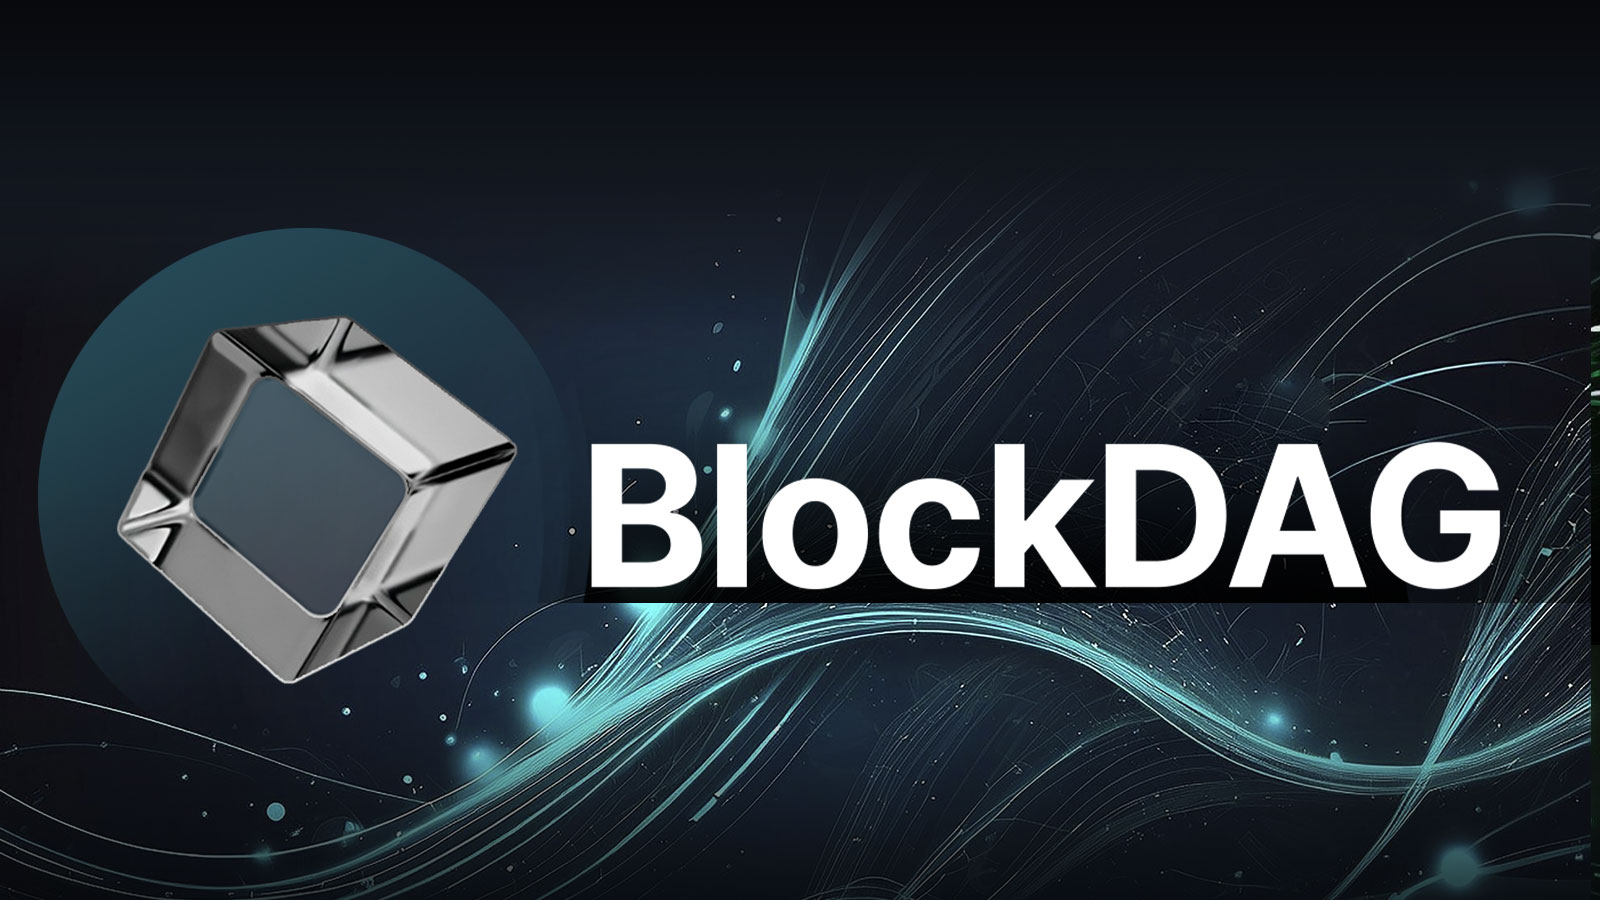 BlockDAG (BDAG), Pullix (PLX) Asset Sale Welcomed by Investors This March, as XRP Altcoin Reaches Local High